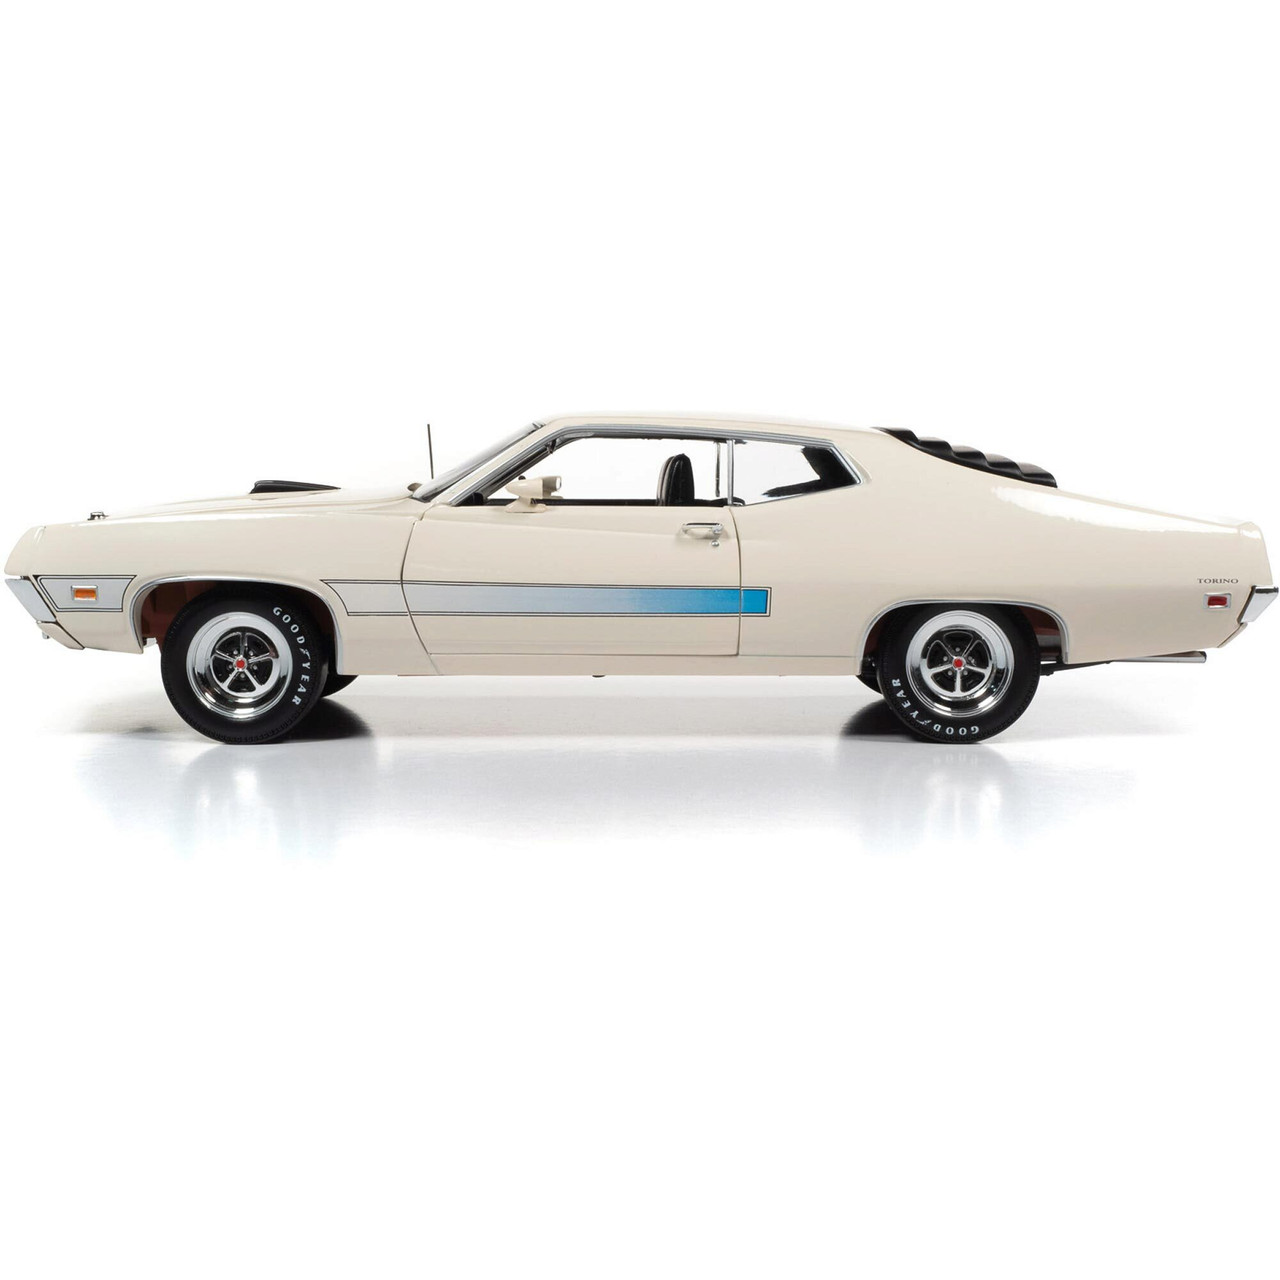 1971 Ford Torino GT Class of 1971 | American Muscle - Ertl